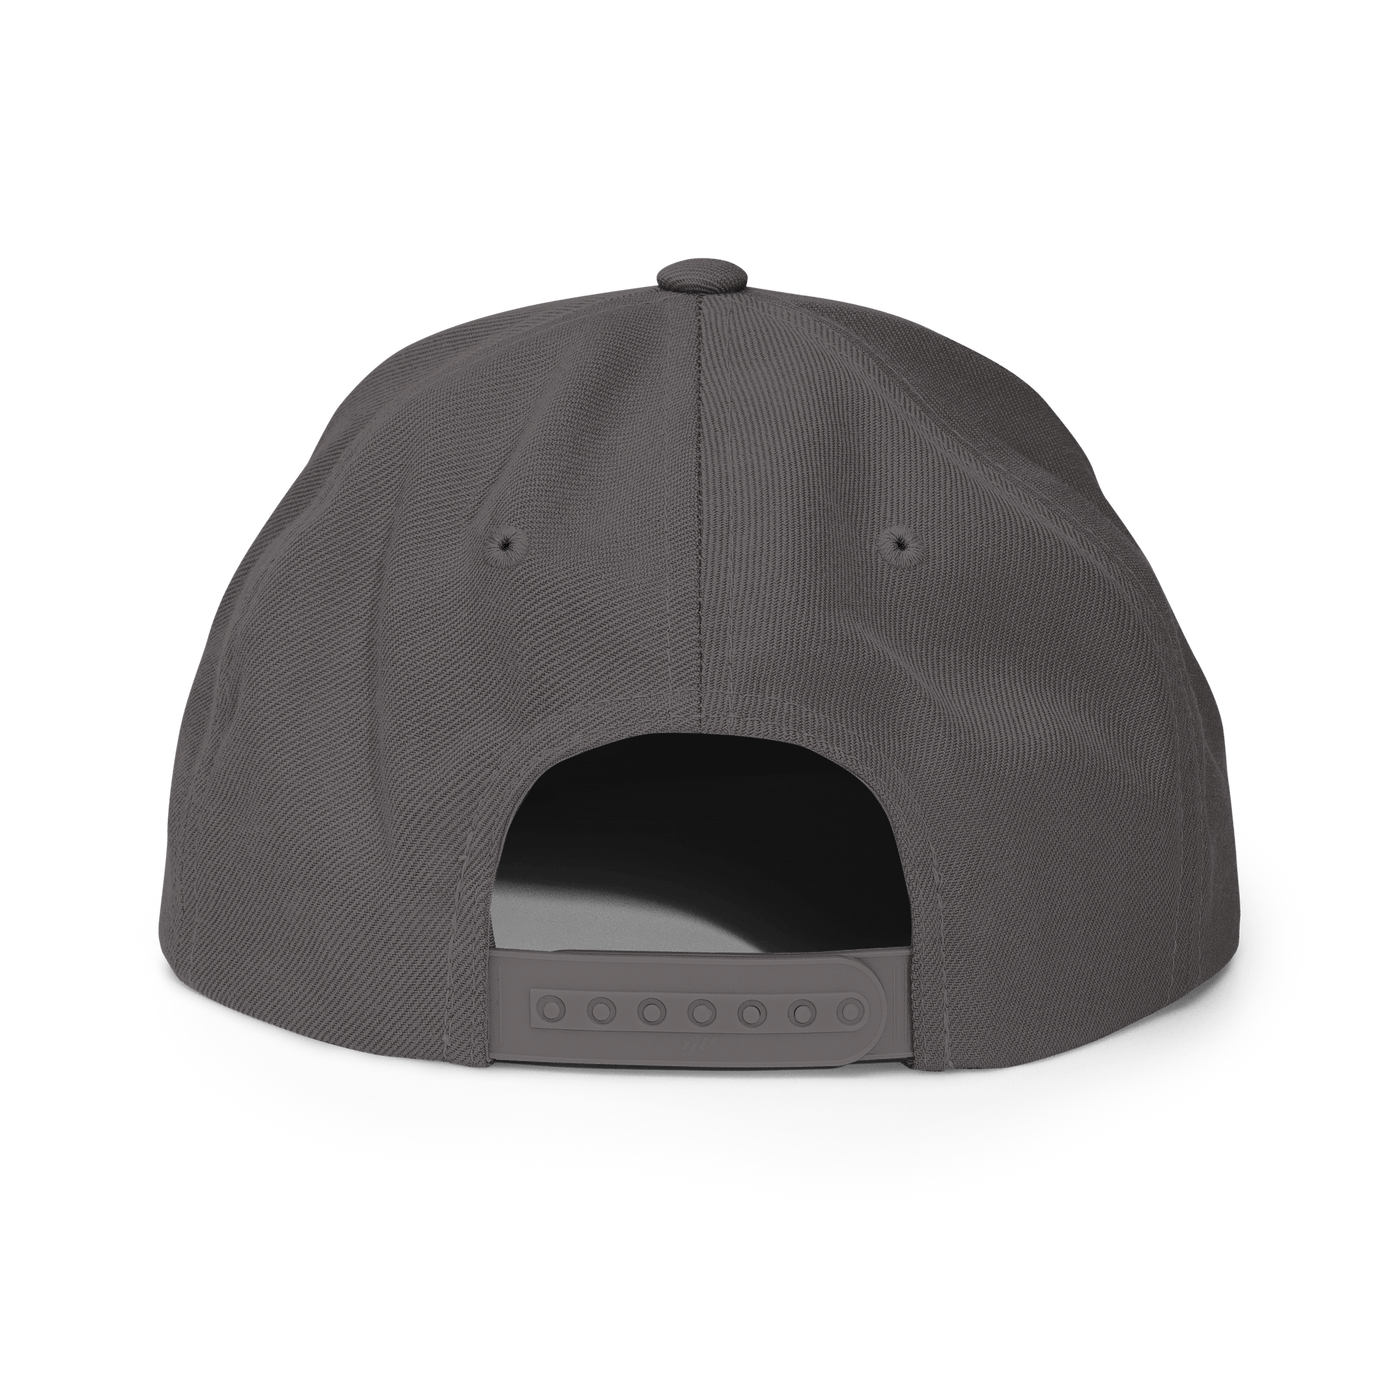 Humanity runs on coffee Snapback Hat - Dark Grey - - Just Another Cap Store